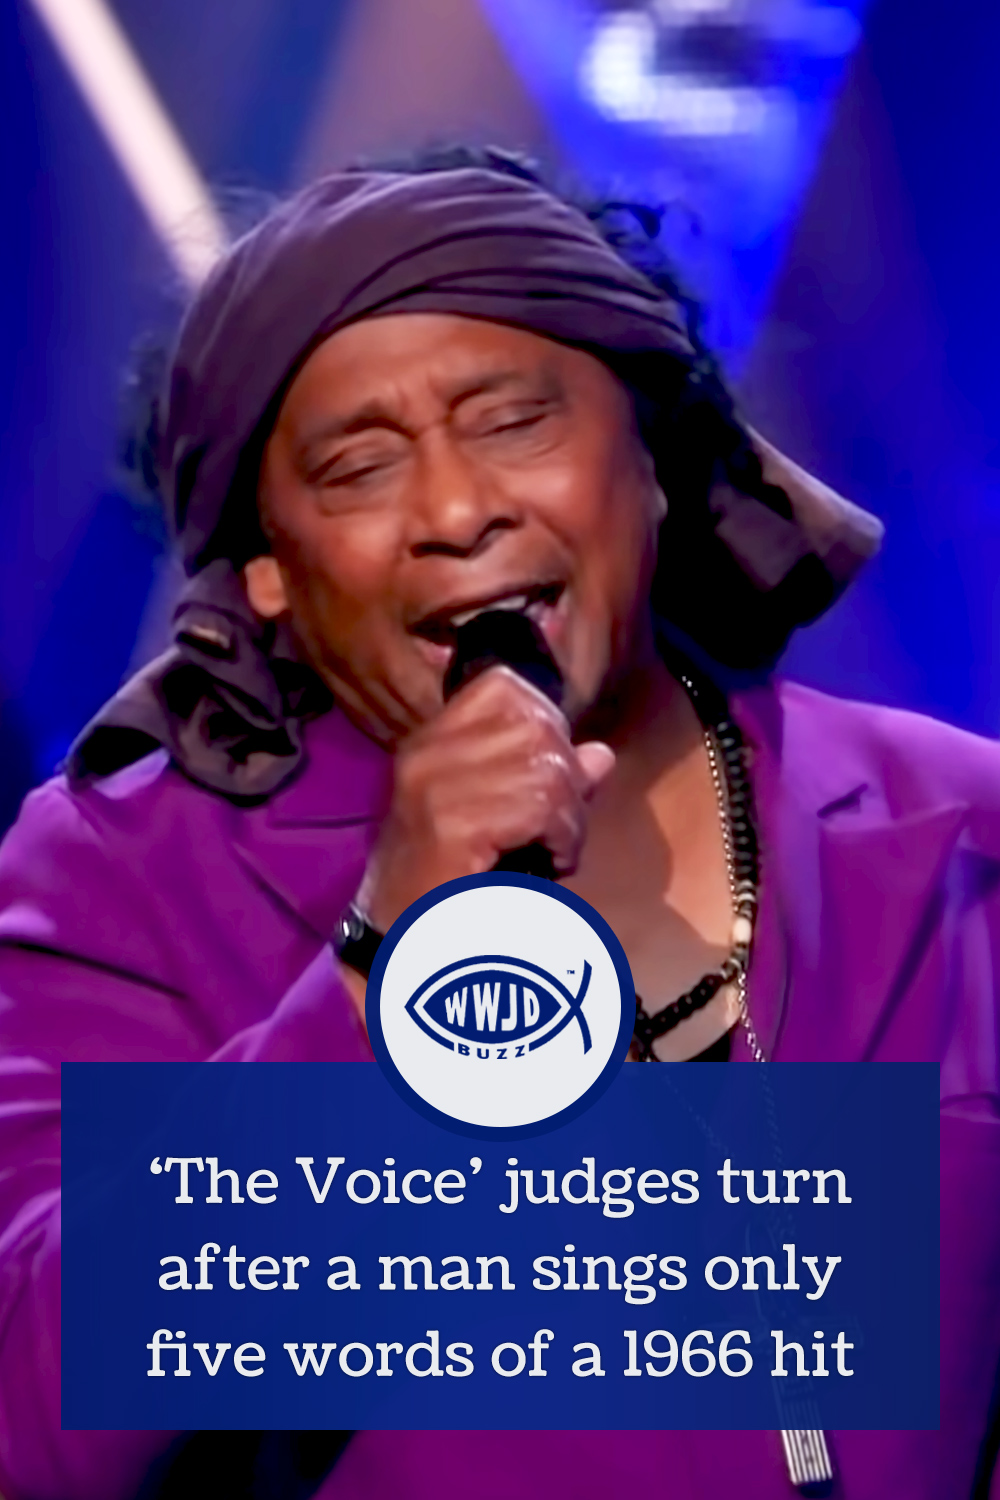 ‘The Voice’ judges turn after a man sings only five words of a 1966 hit